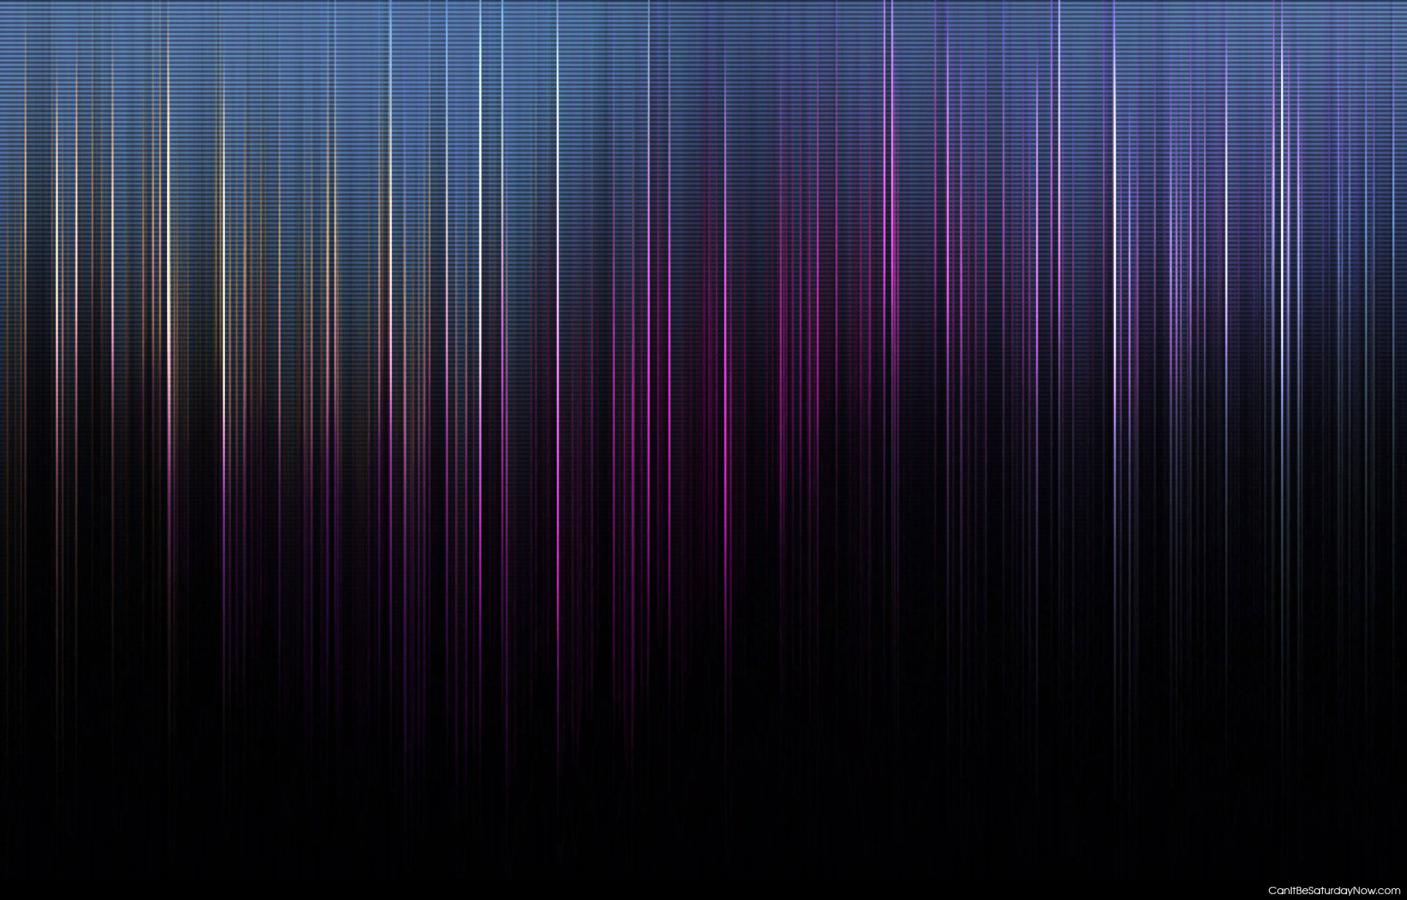 Columns of light - i thin its one of the default mac backgrounds or something